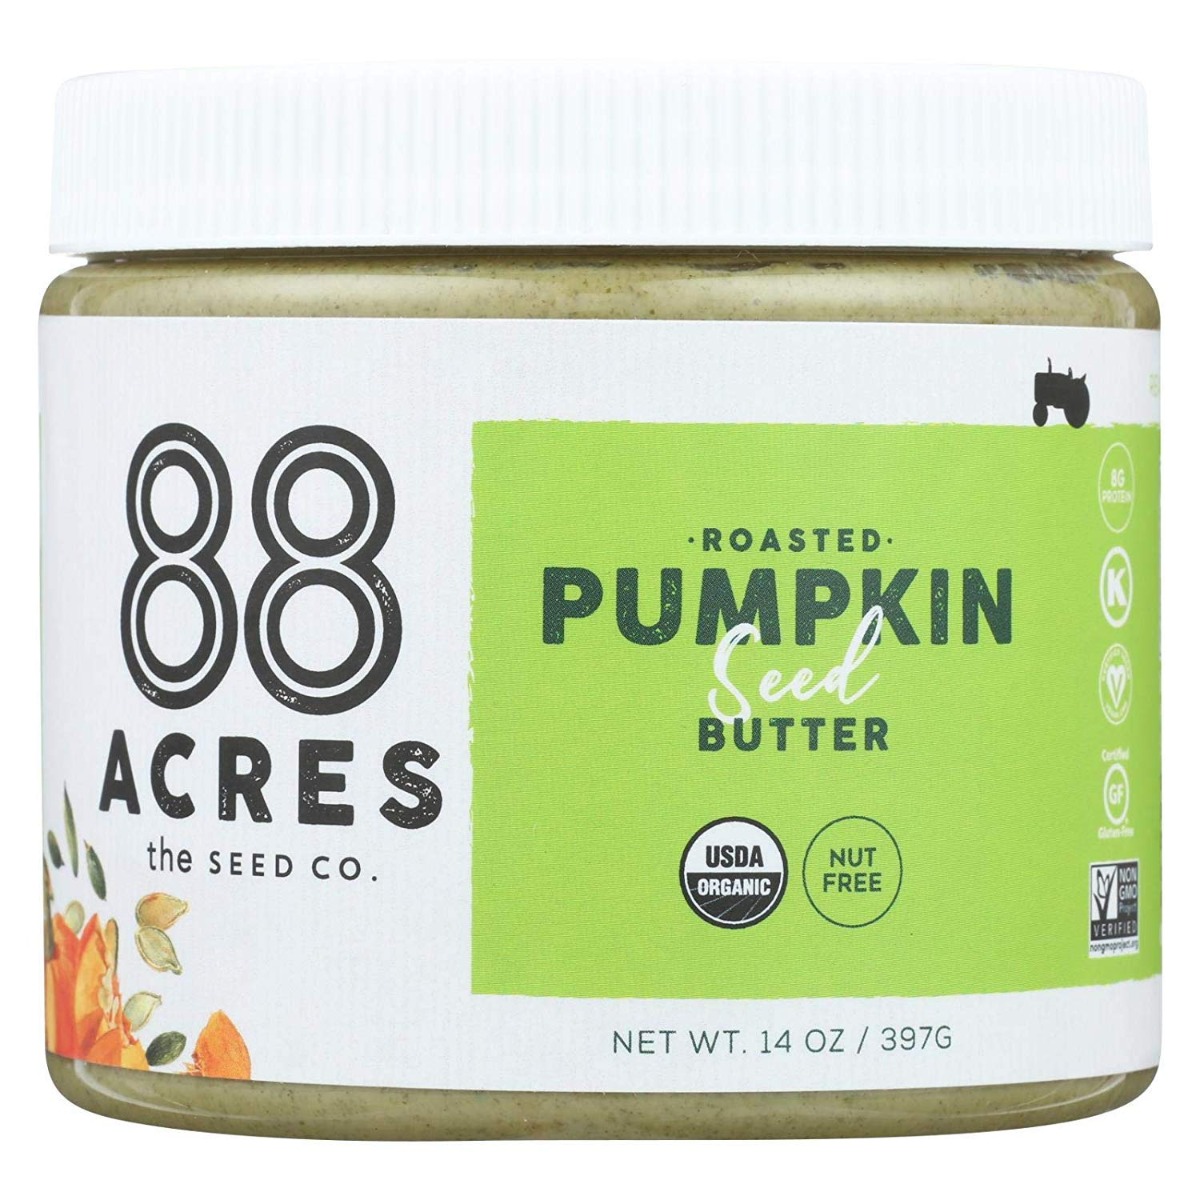 Picture of 88 Acres KHRM00335131 14 oz Organic Roasted Butter Pumpkin Seed